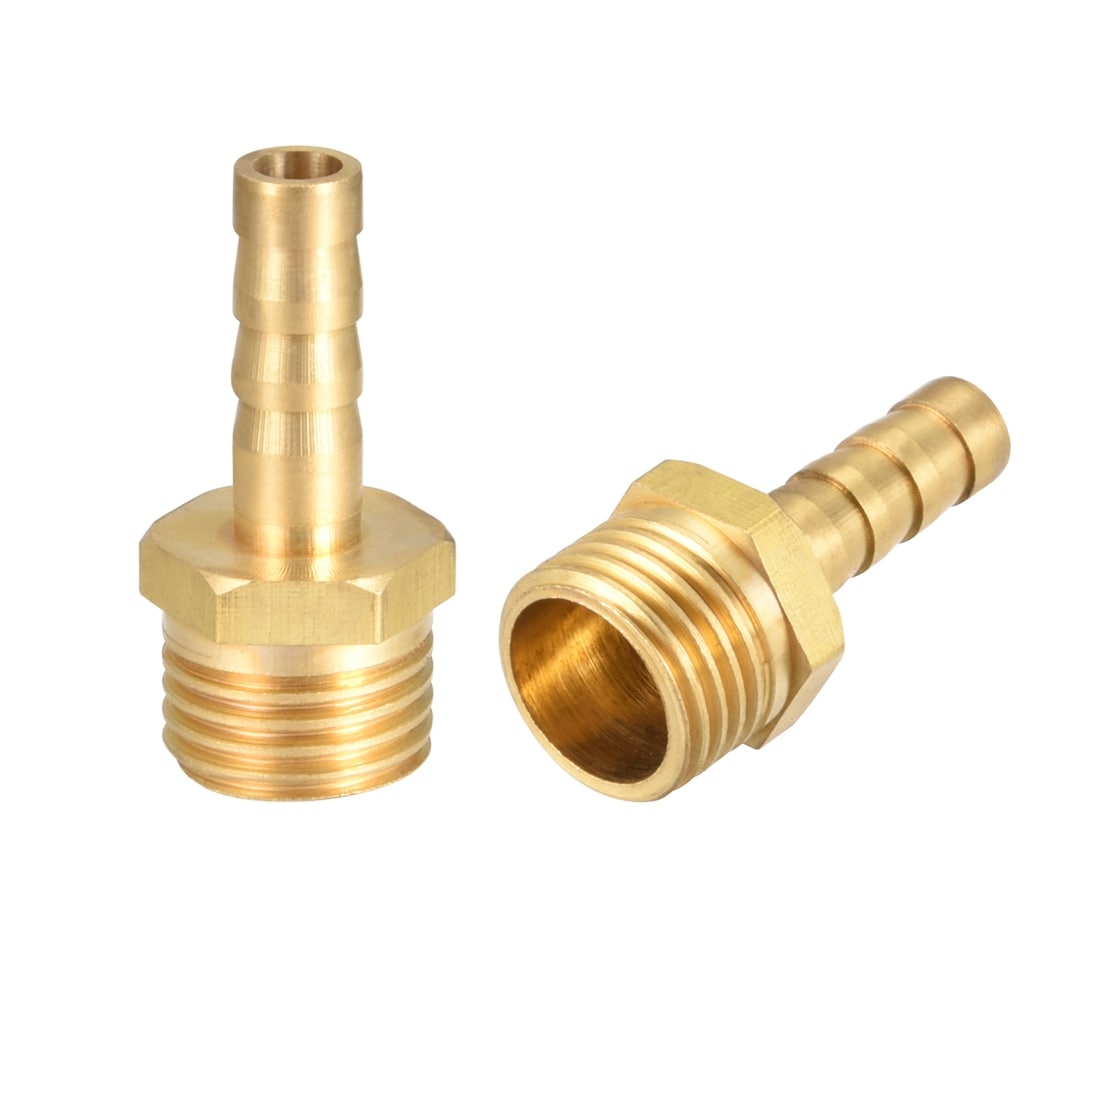 Size: 19mm OD; Thread Specification: 3/4 16mm 19mm Hose Barb x 3/4 BSP Male Thread Elbow Brass Barbed Pipe Fitting Coupler Connector Adapter For Fuel Gas Water